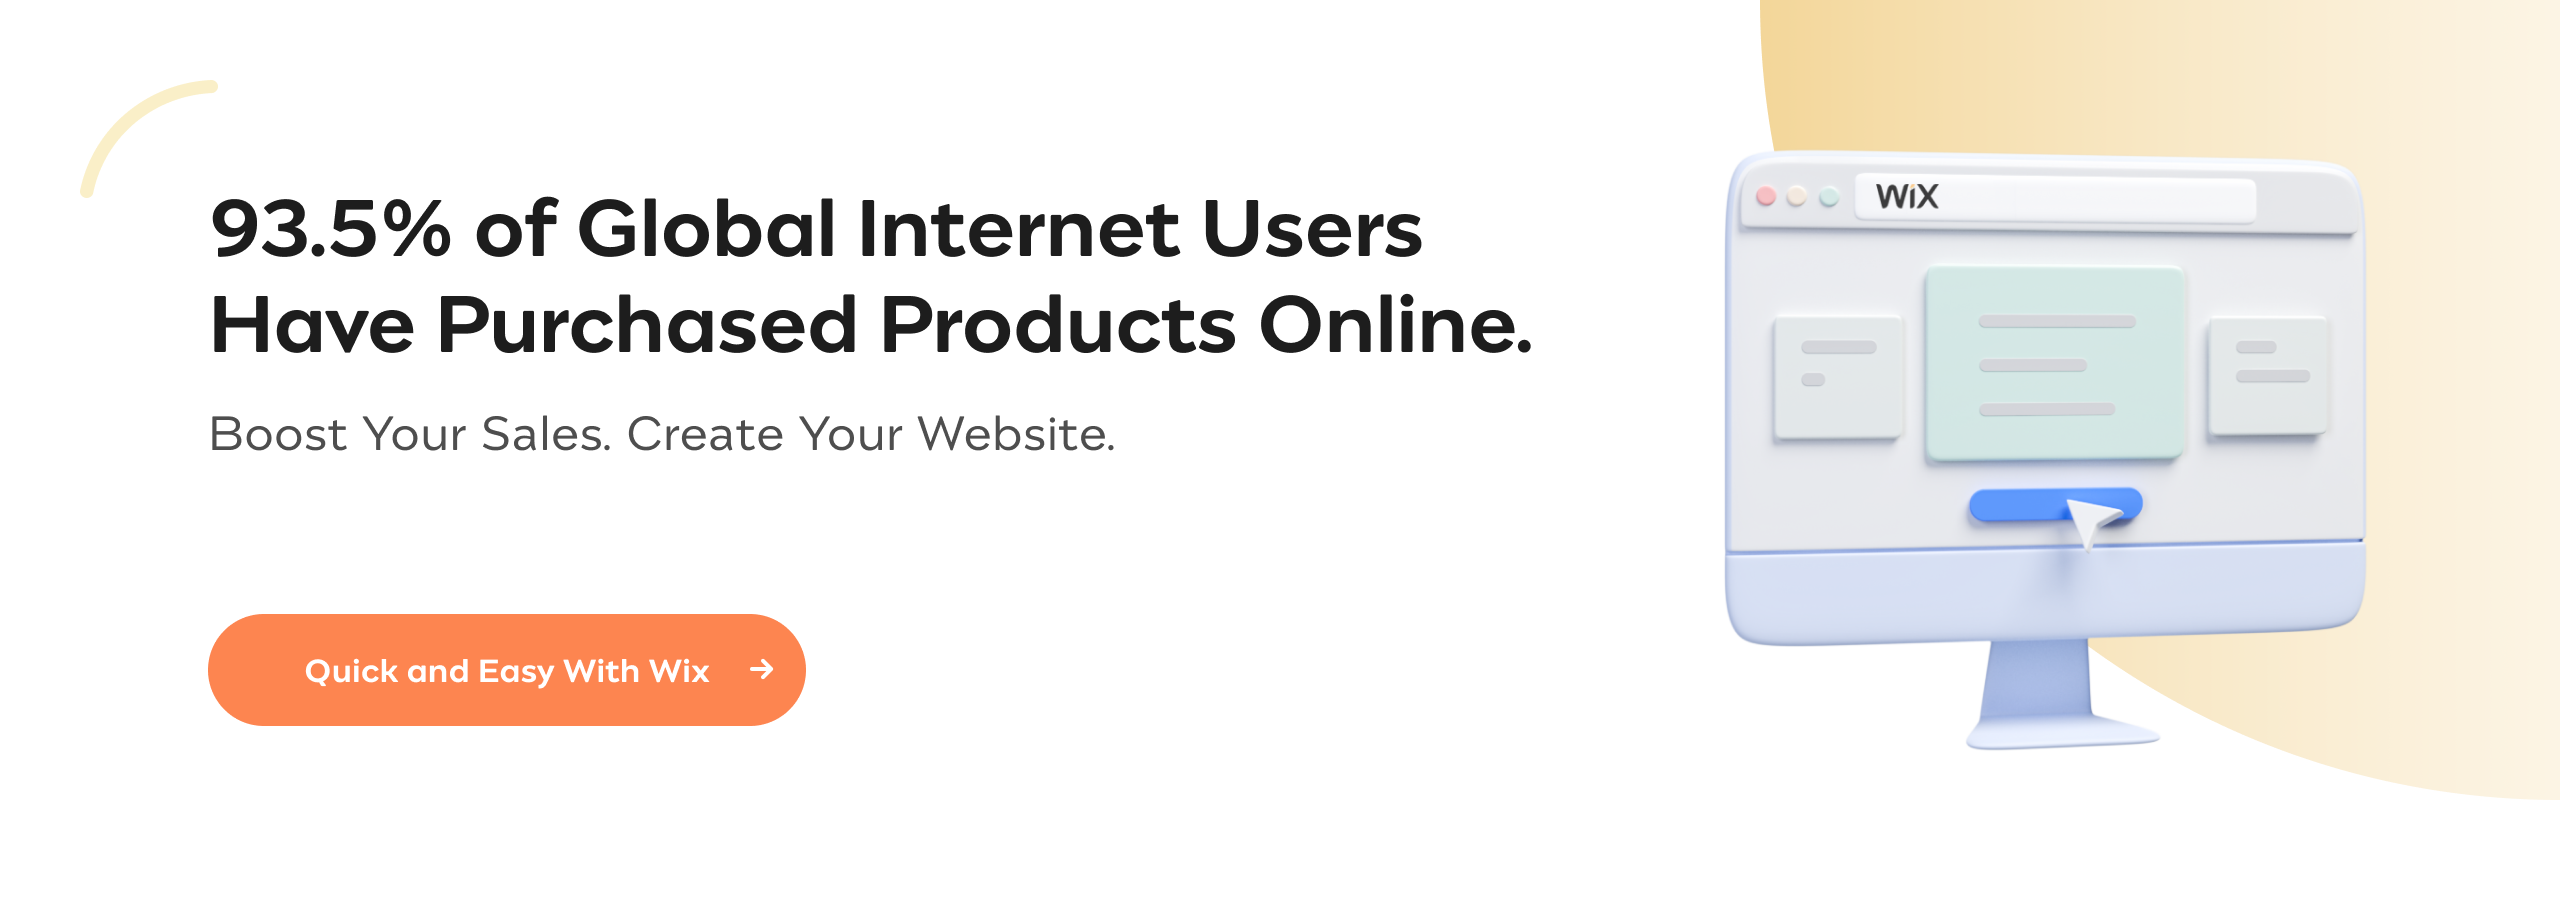 93.5% of Global Internet Users Have Purchased Products Online. Boost Your Sales. Create Your Website.